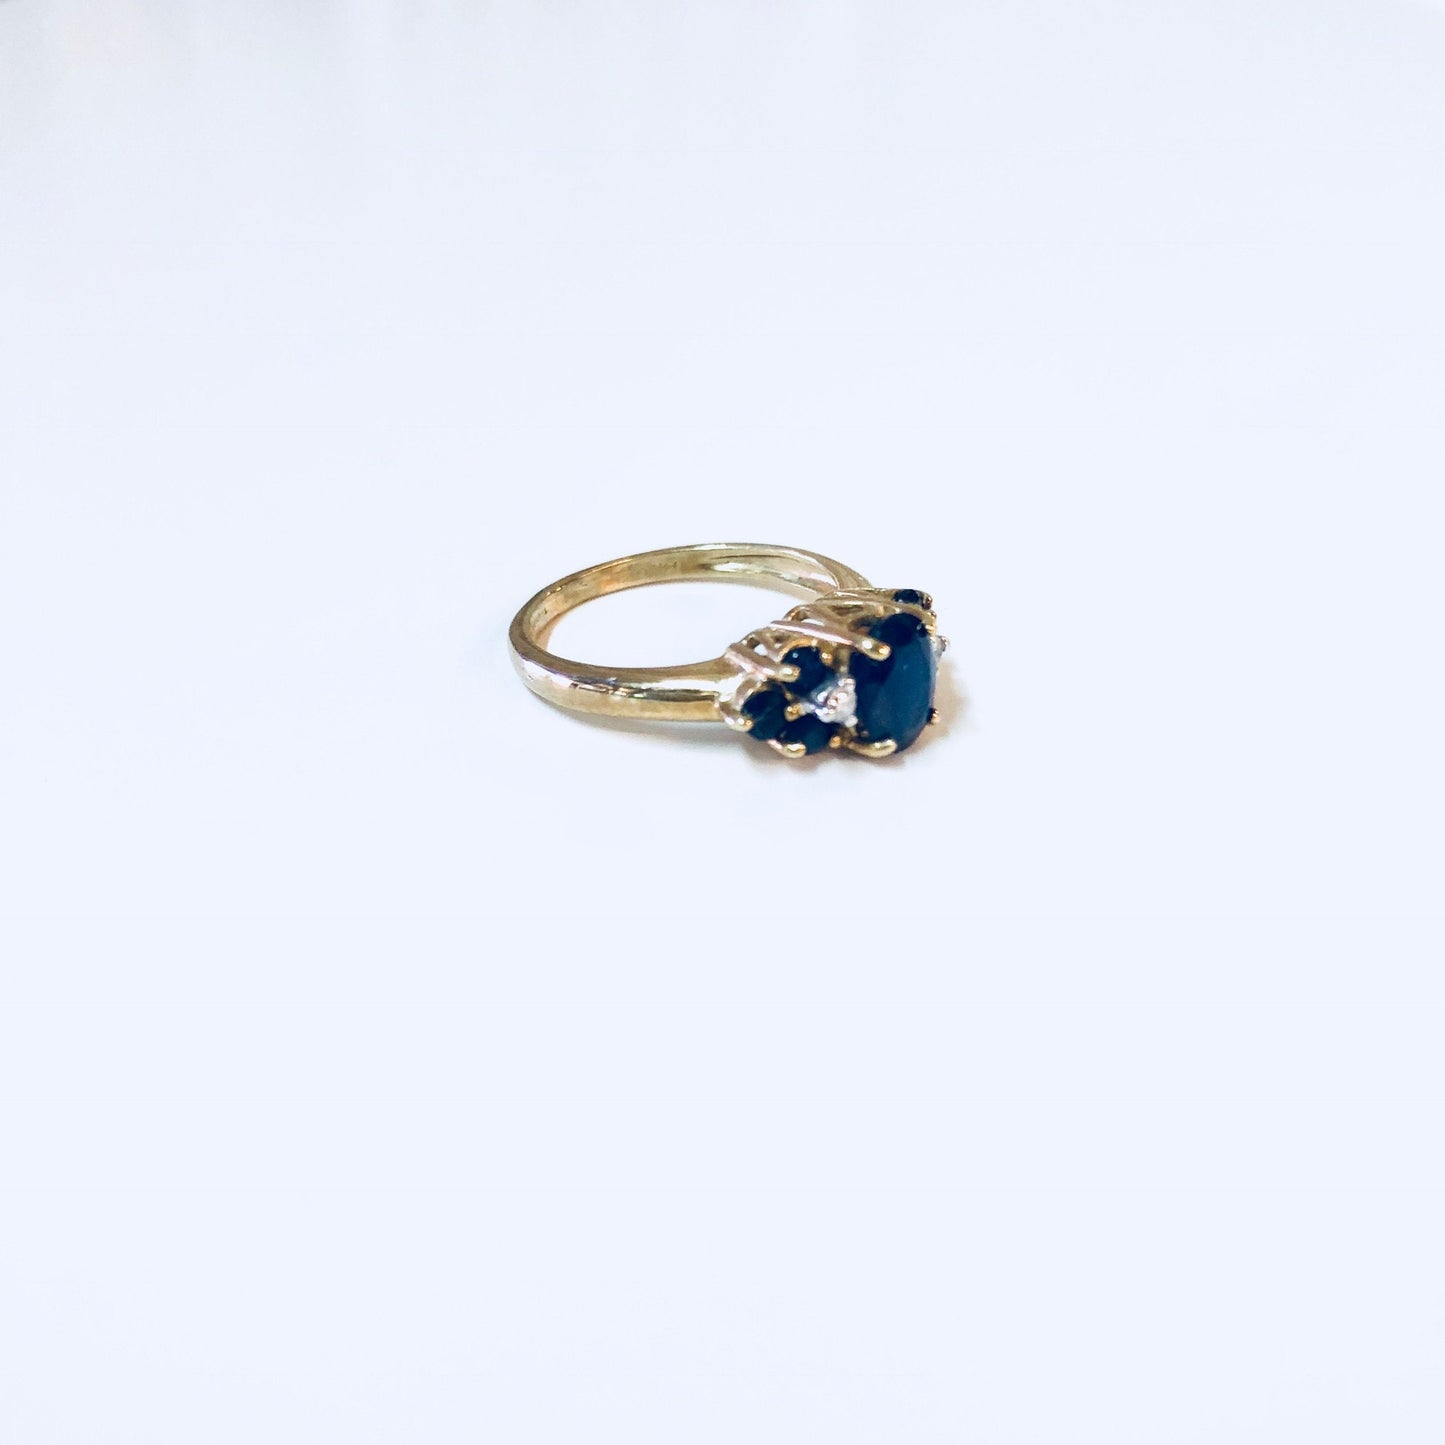 Vintage 14K yellow gold ring with blue sapphire stones, suitable for engagement, wedding or September birthstone jewelry.